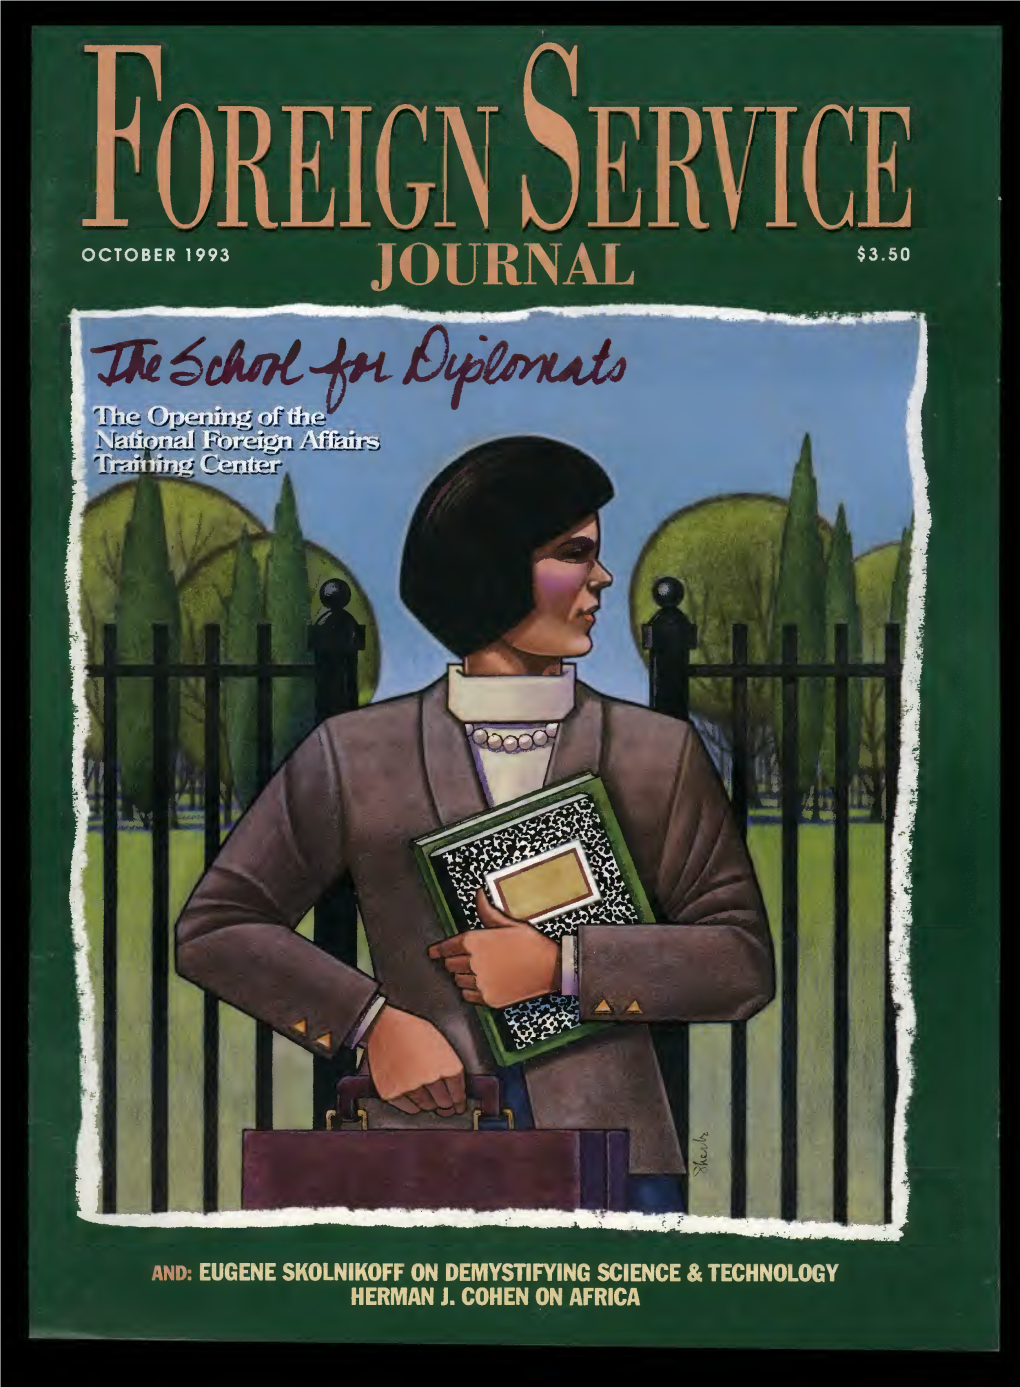 The Foreign Service Journal, October 1993